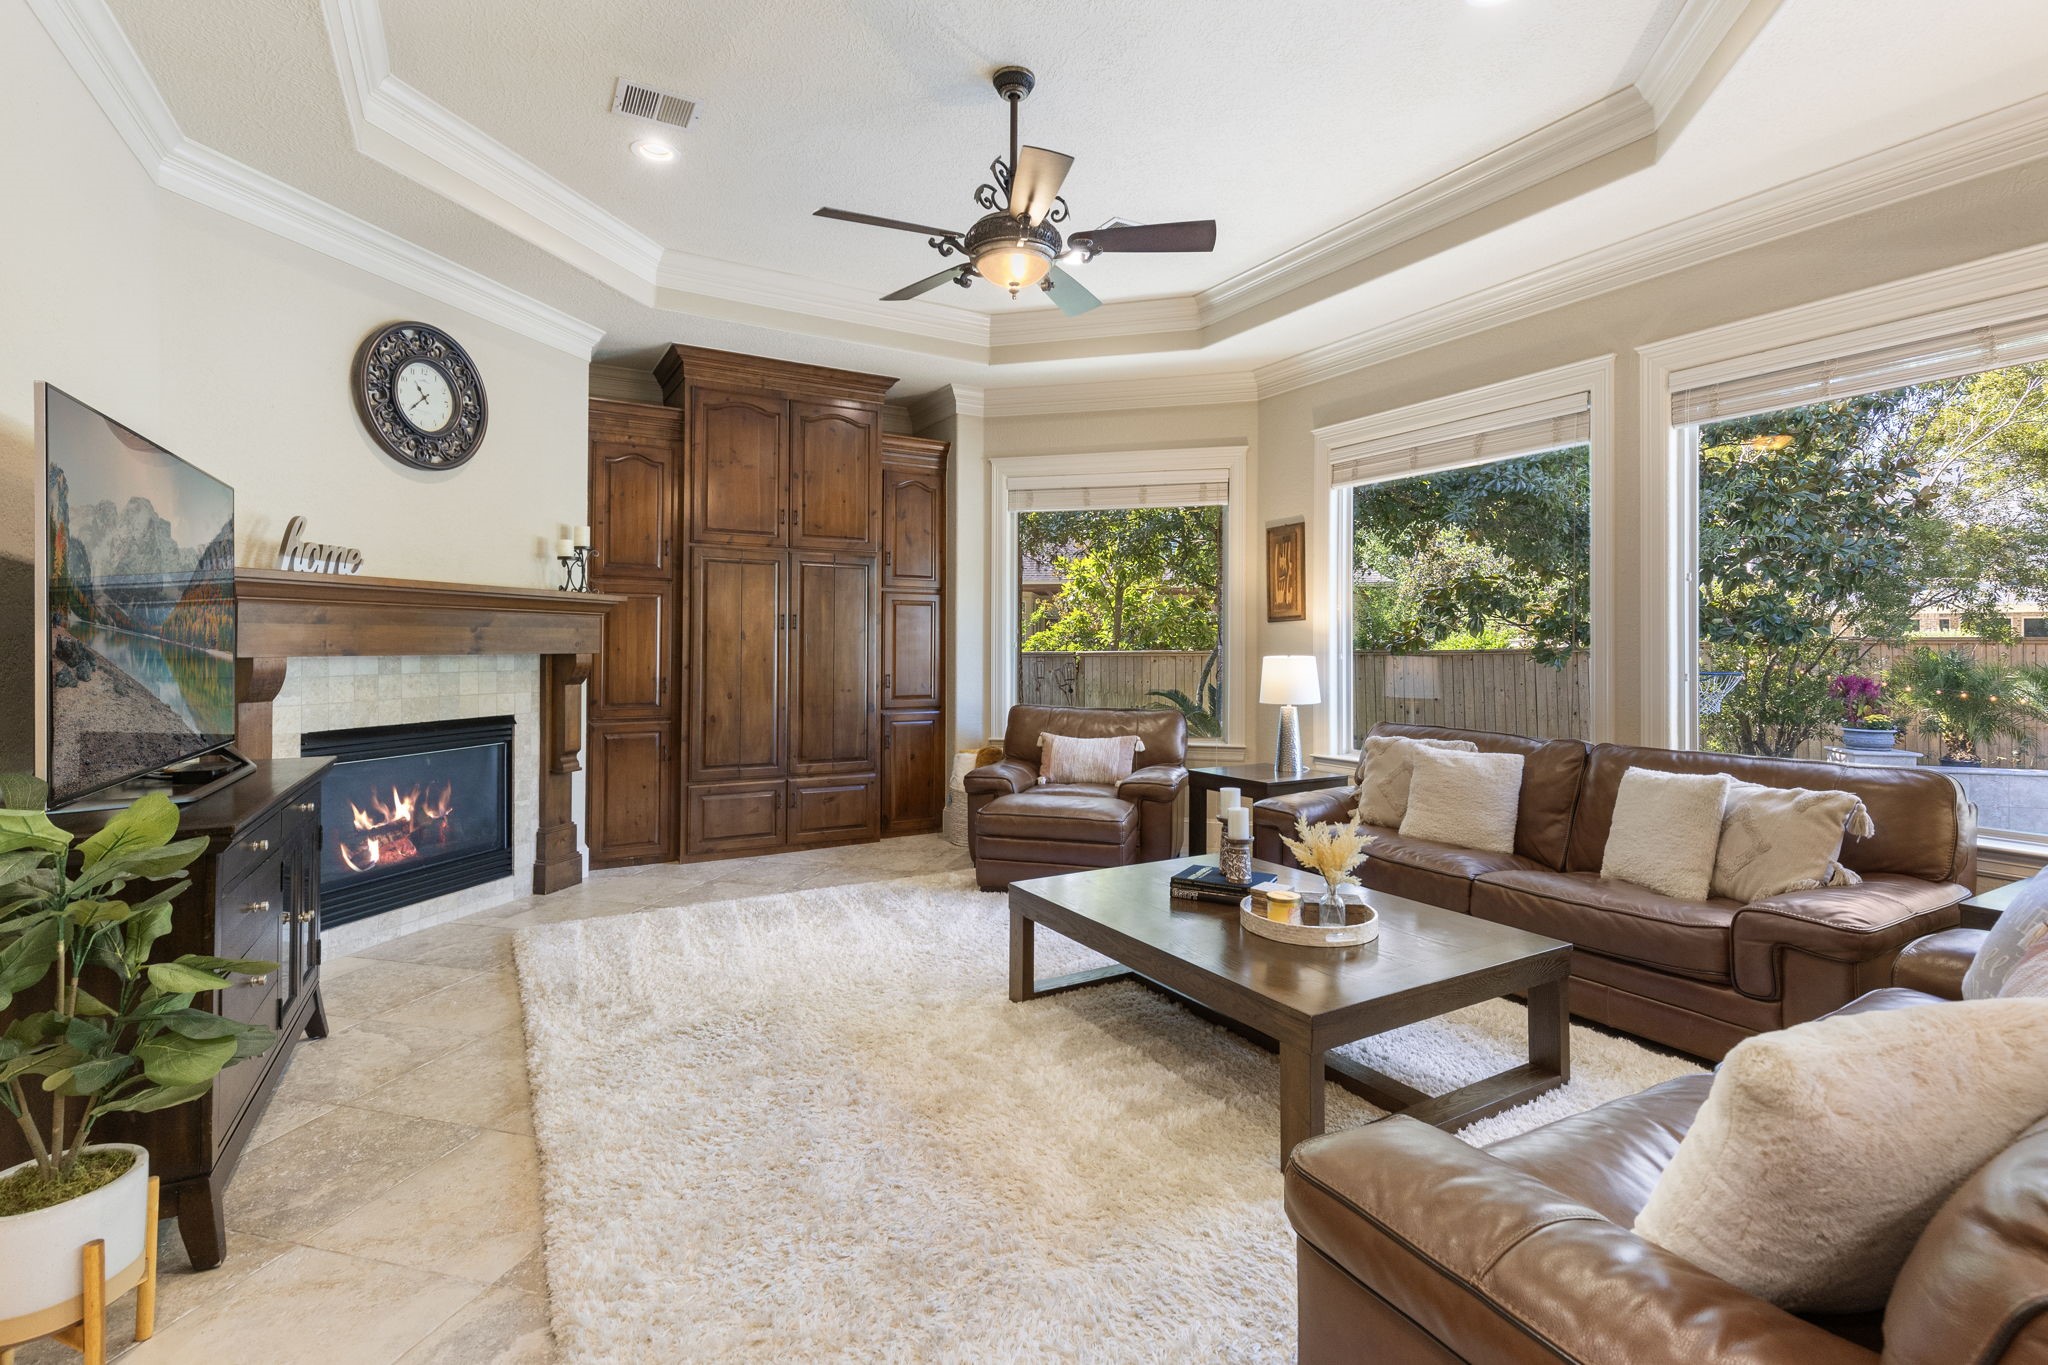 The family room allows for the main gathering space with floor to ceiling custom built in cabinetry for your storage and media needs, embellished millwork and a gas log fireplace with tile surround and wood mantle.